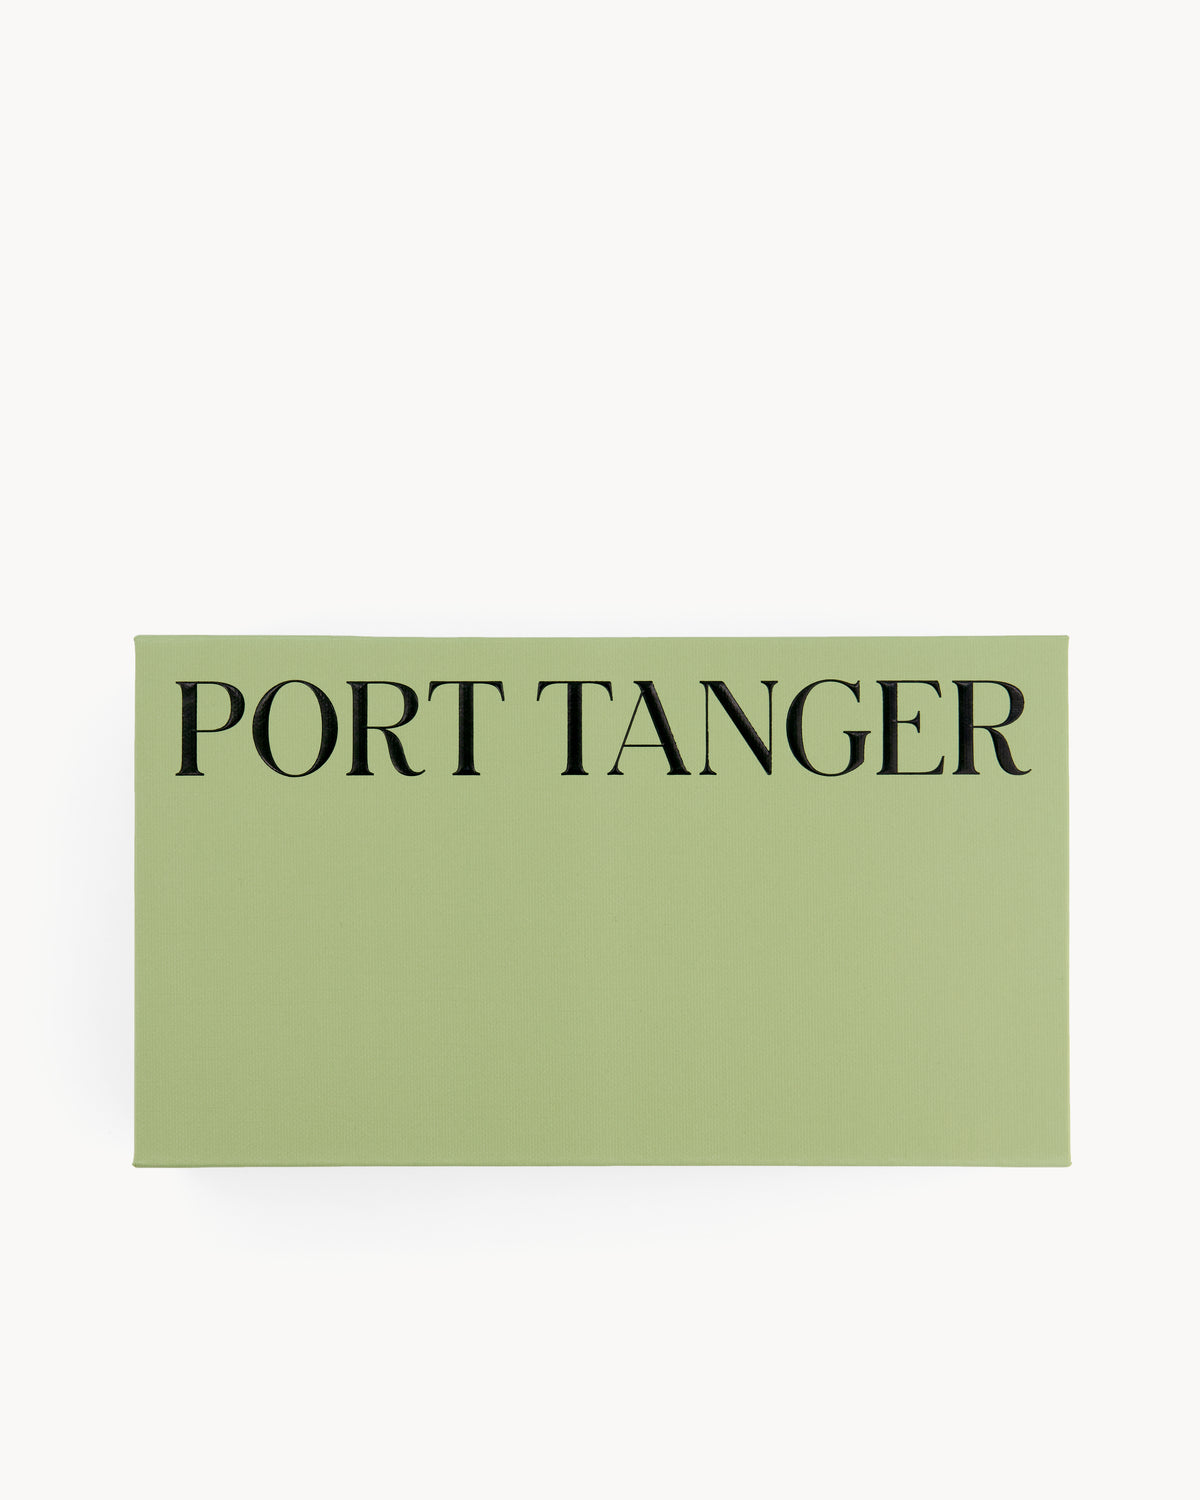 Port Tanger Ruh Sunglasses in Parchment Acetate and Amber Lenses 5